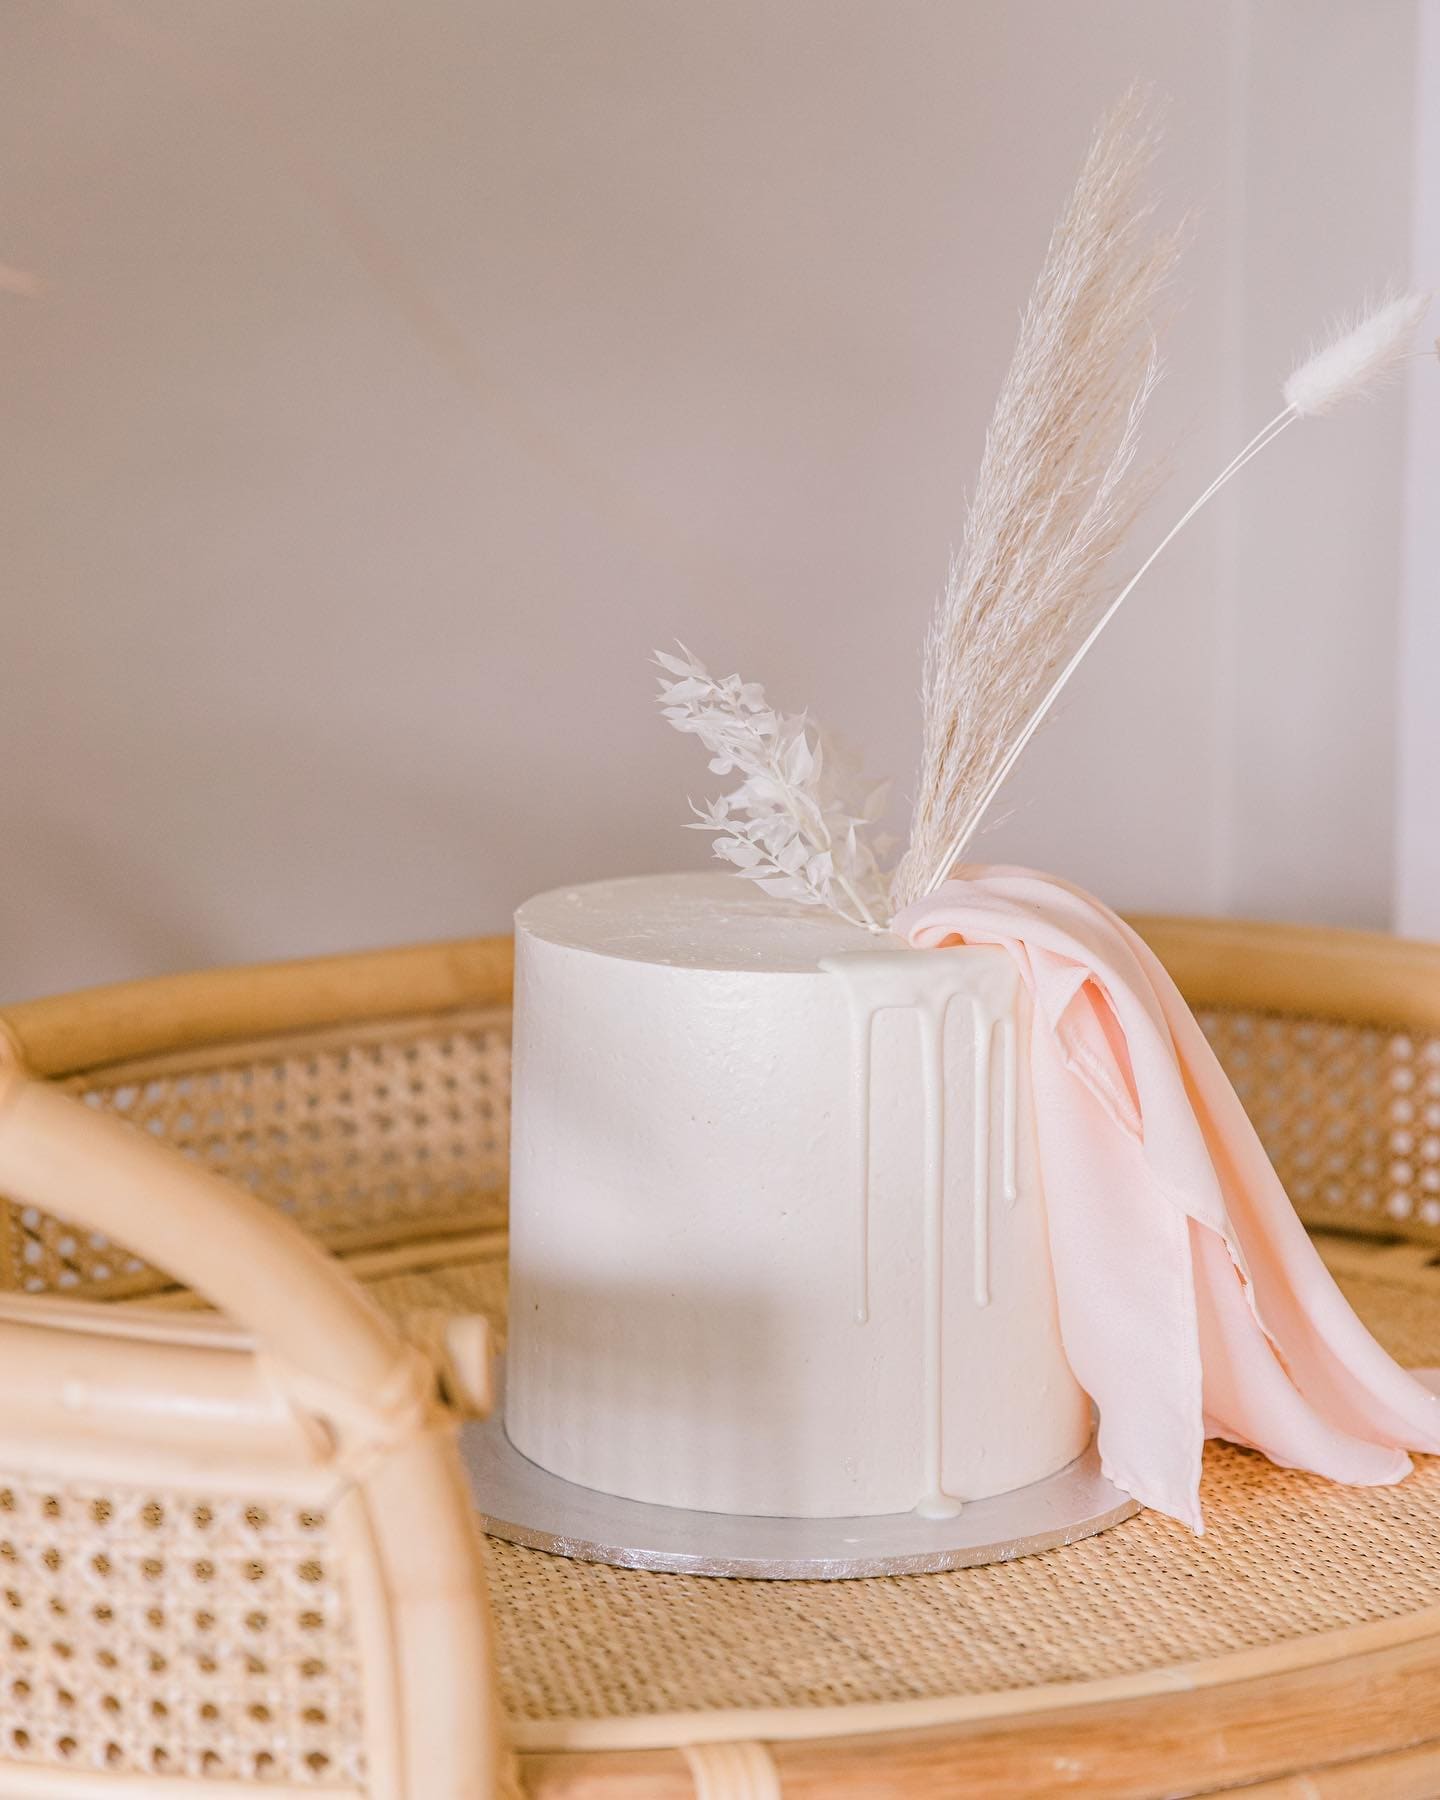 Rustic Wedding Cakes - There Must Be Cake